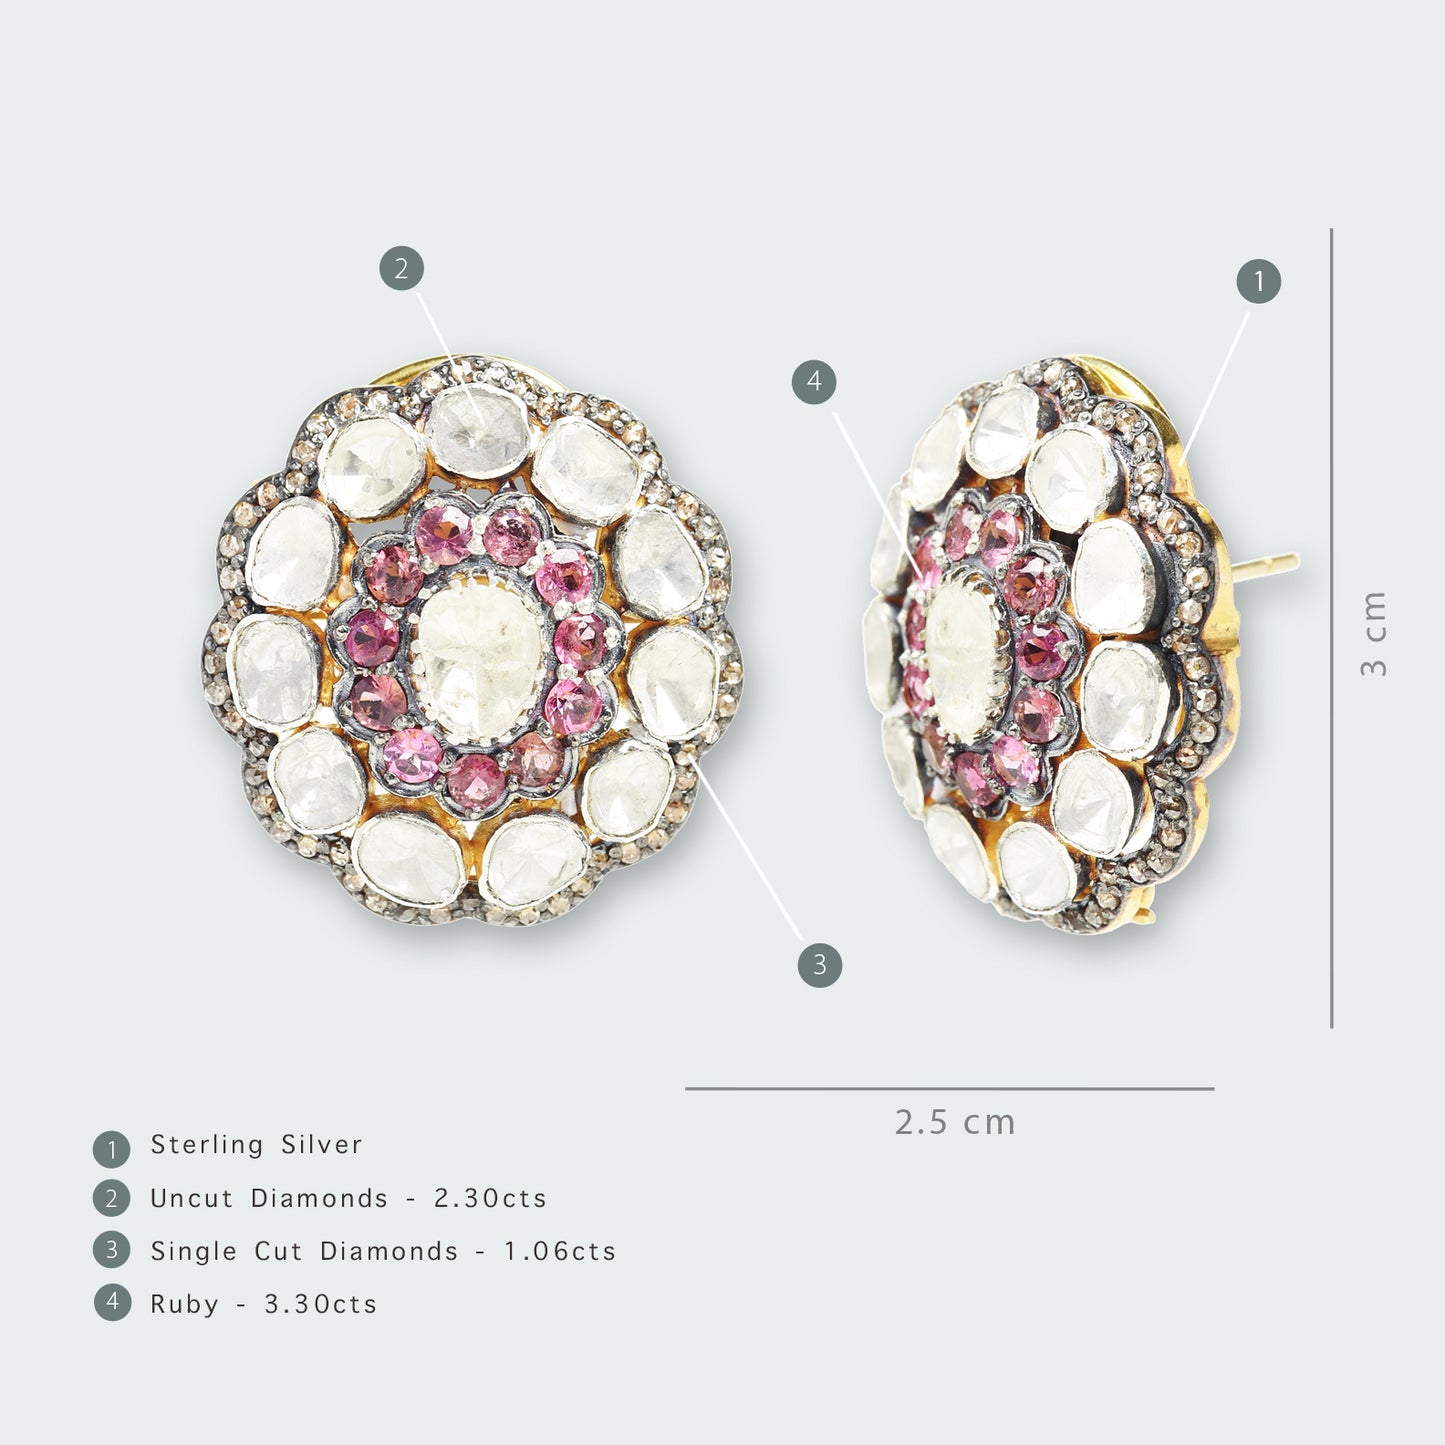 Astrales Flower Ruby and Uncut Diamond Earring